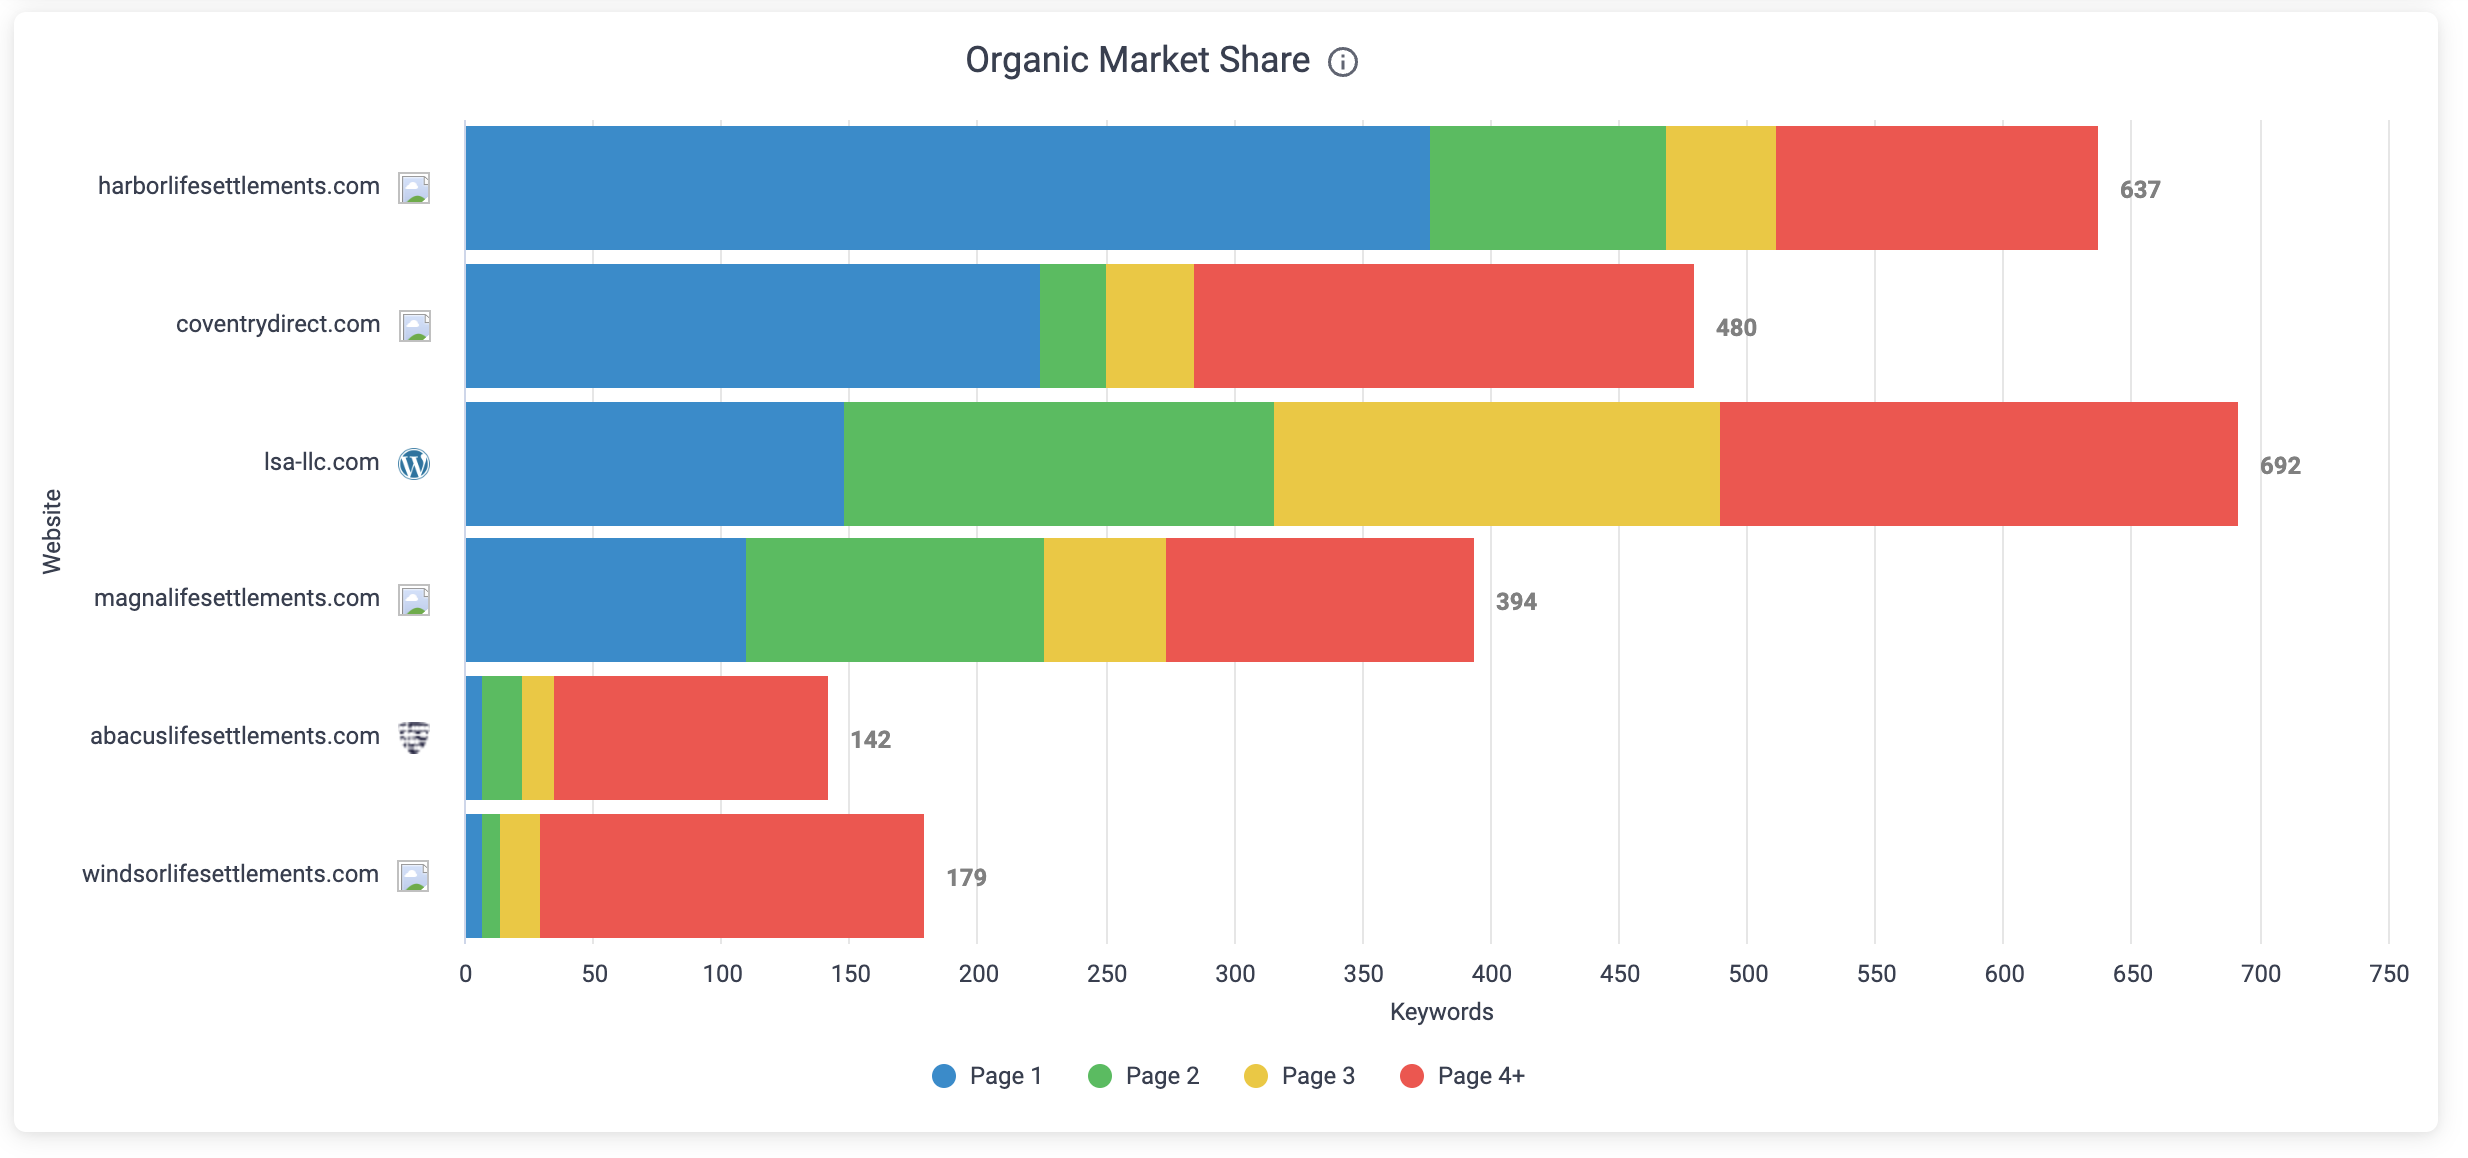 LSA increased organic market share with SEO